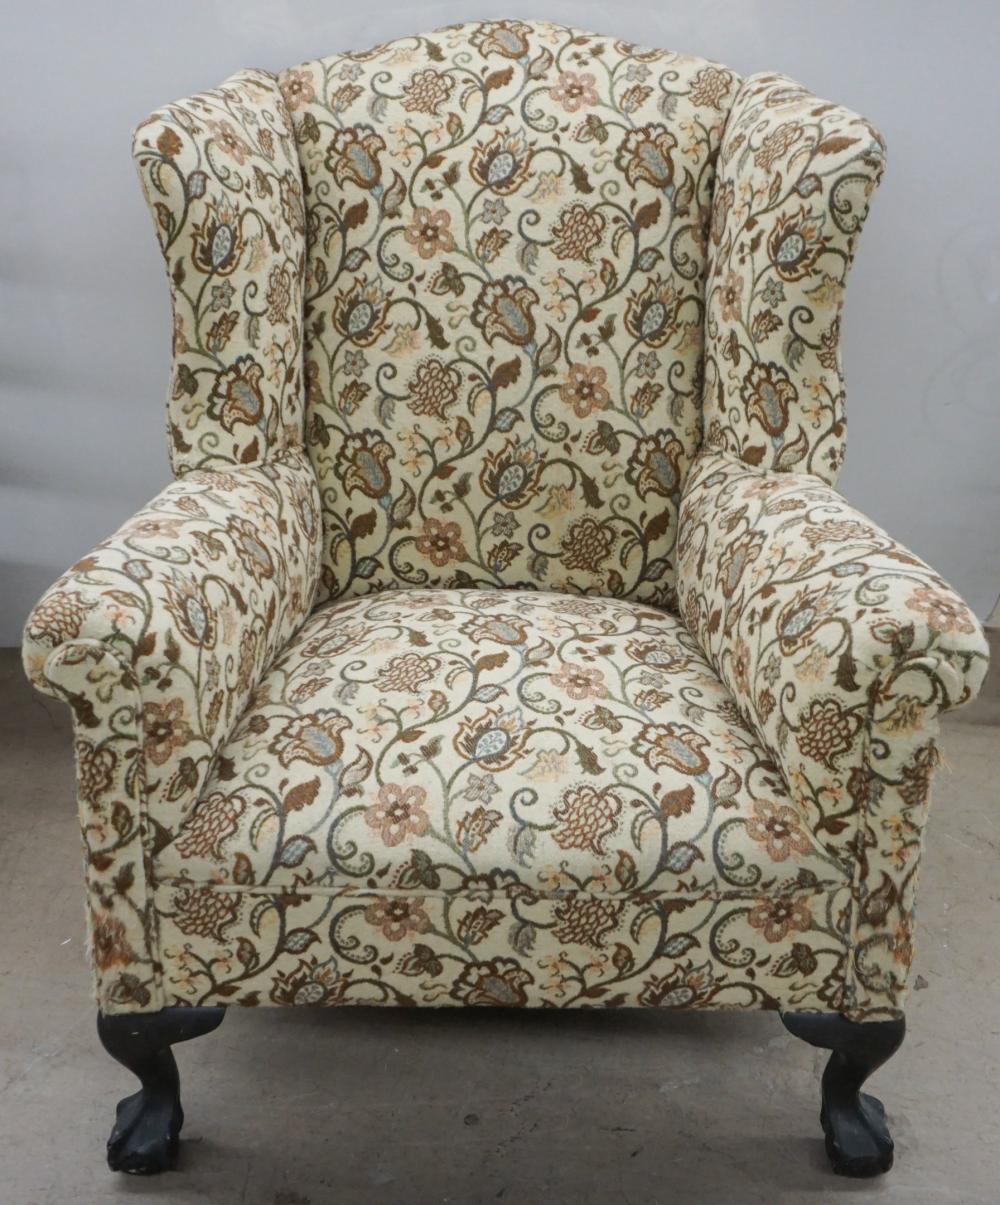 CHIPPENDALE STYLE FLORAL UPHOLSTERED 330ec1